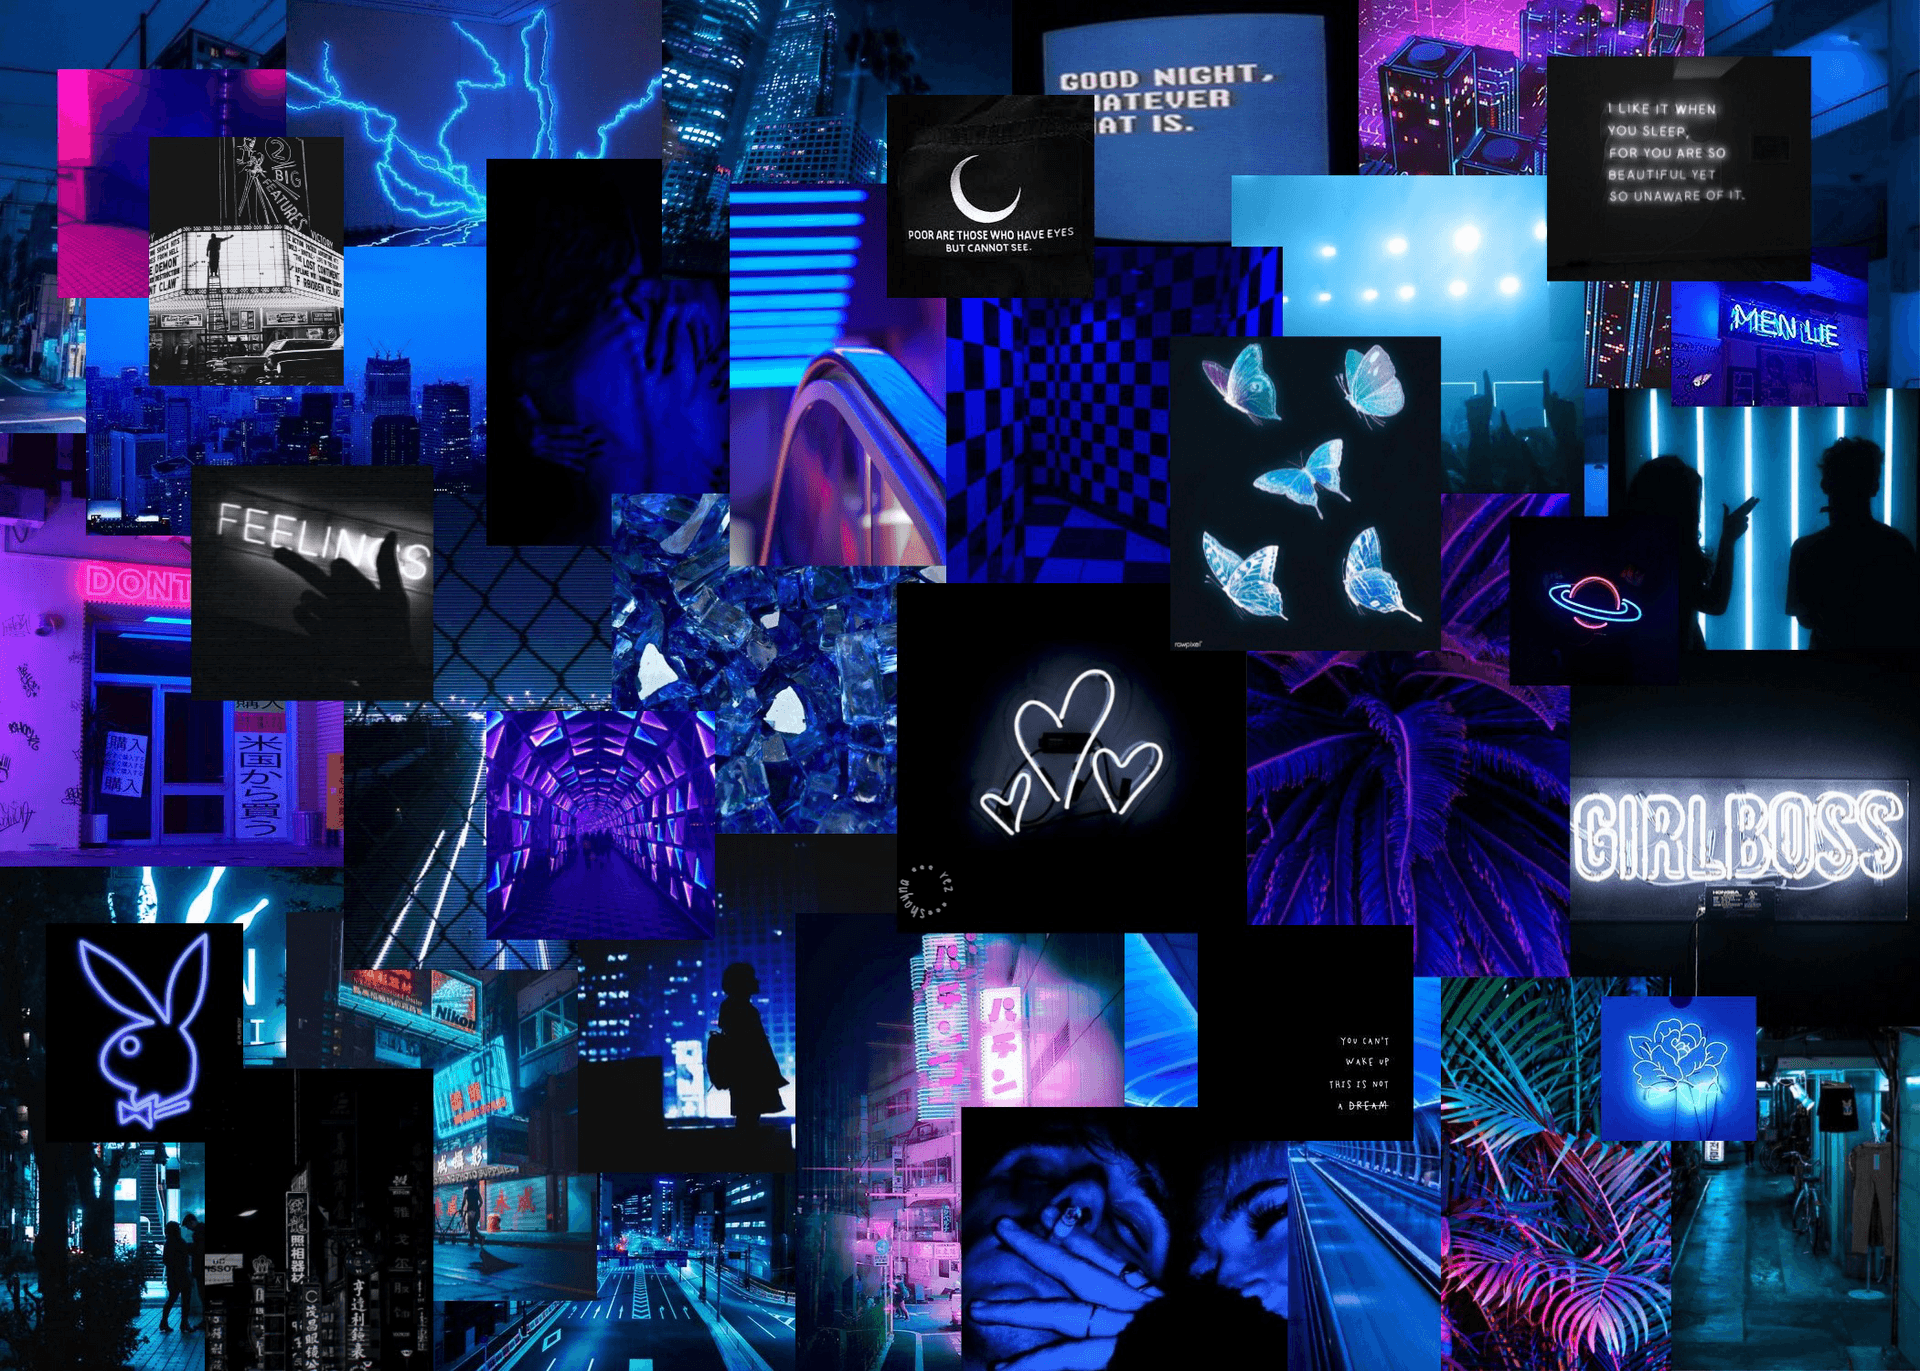 Enveloped By The Neon Blue Aesthetic - An Explosive Expression Of Artistic Fusion